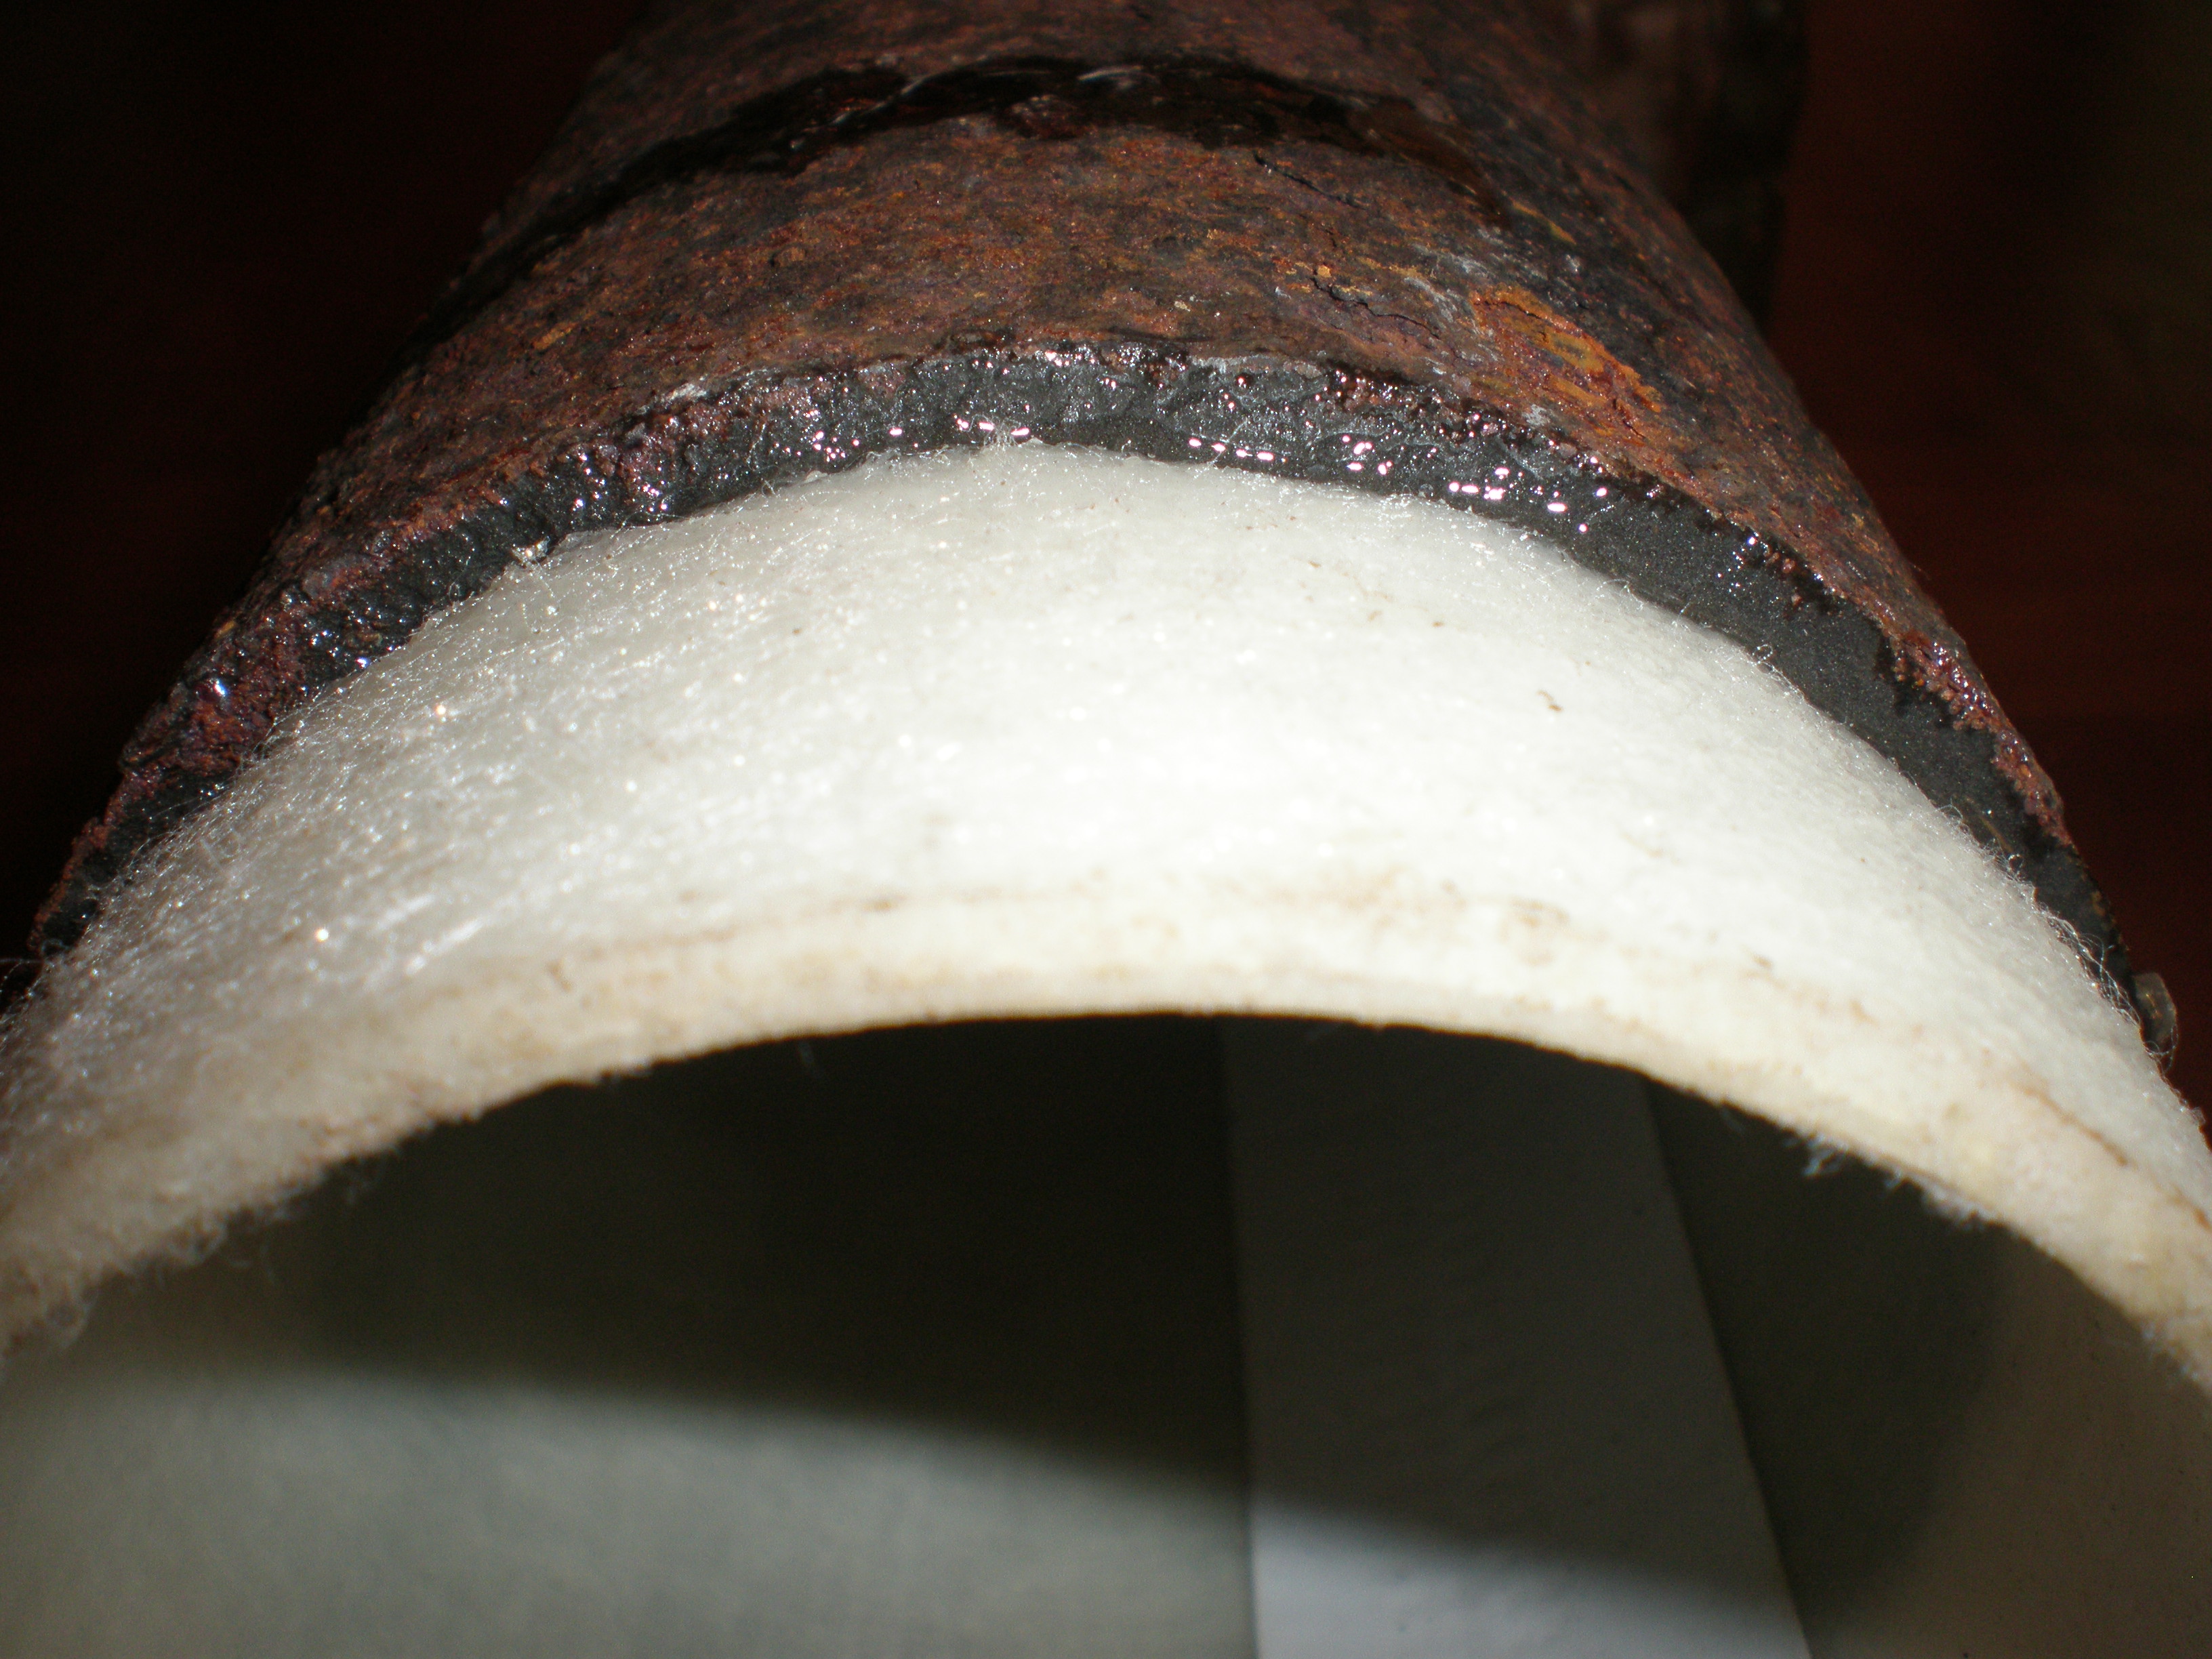 Cast Iron Cured In Place Pipe Lining Lasts 100 Years! Reduces Diameter Only 5%